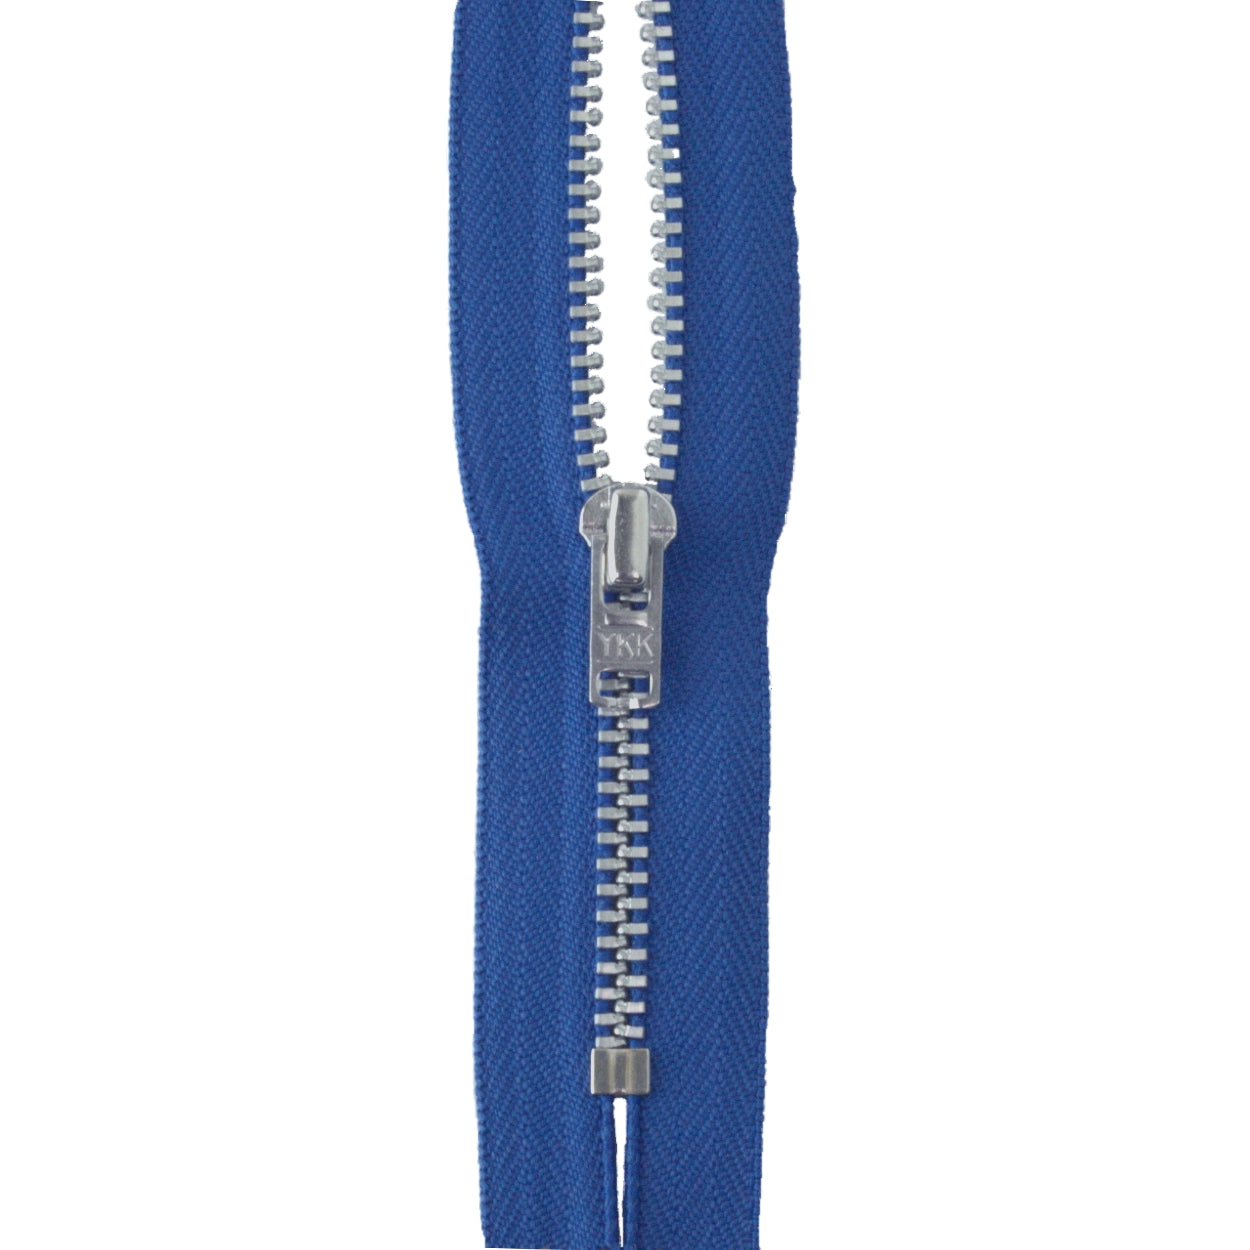 YKK silver tooth Metal Dress Zips - Royal Blue from Jaycotts Sewing Supplies